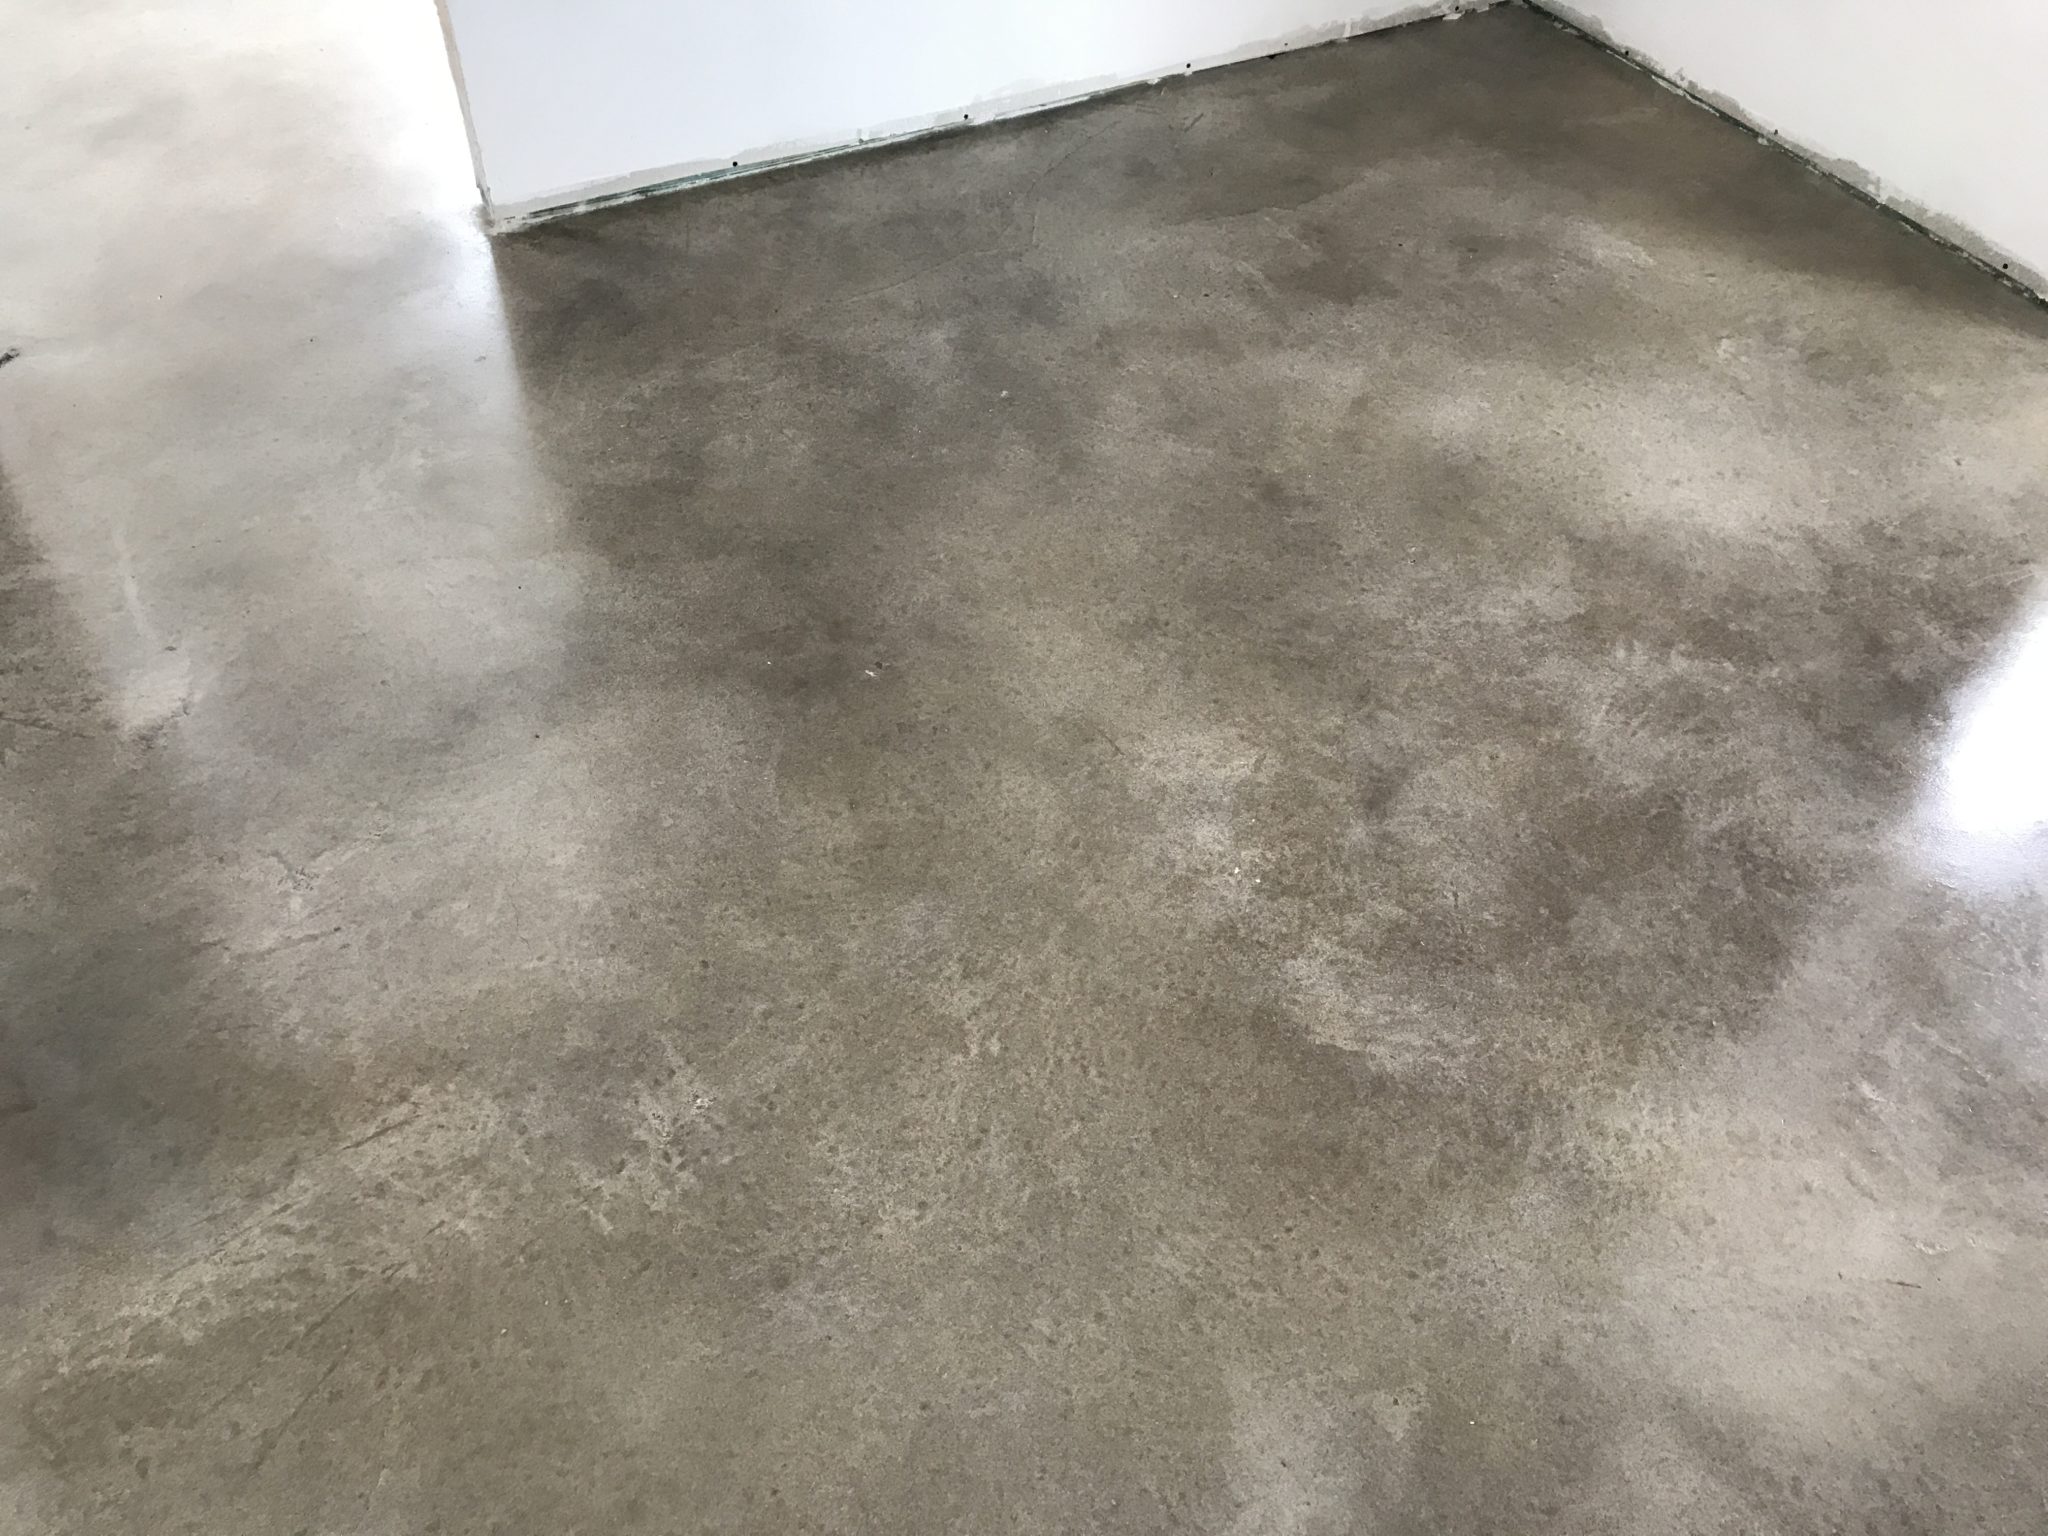 Concrete Staining Austin Atx Stained Concrete Commercial Concrete Staining And Residential Stained Concrete For Beautiful Floors